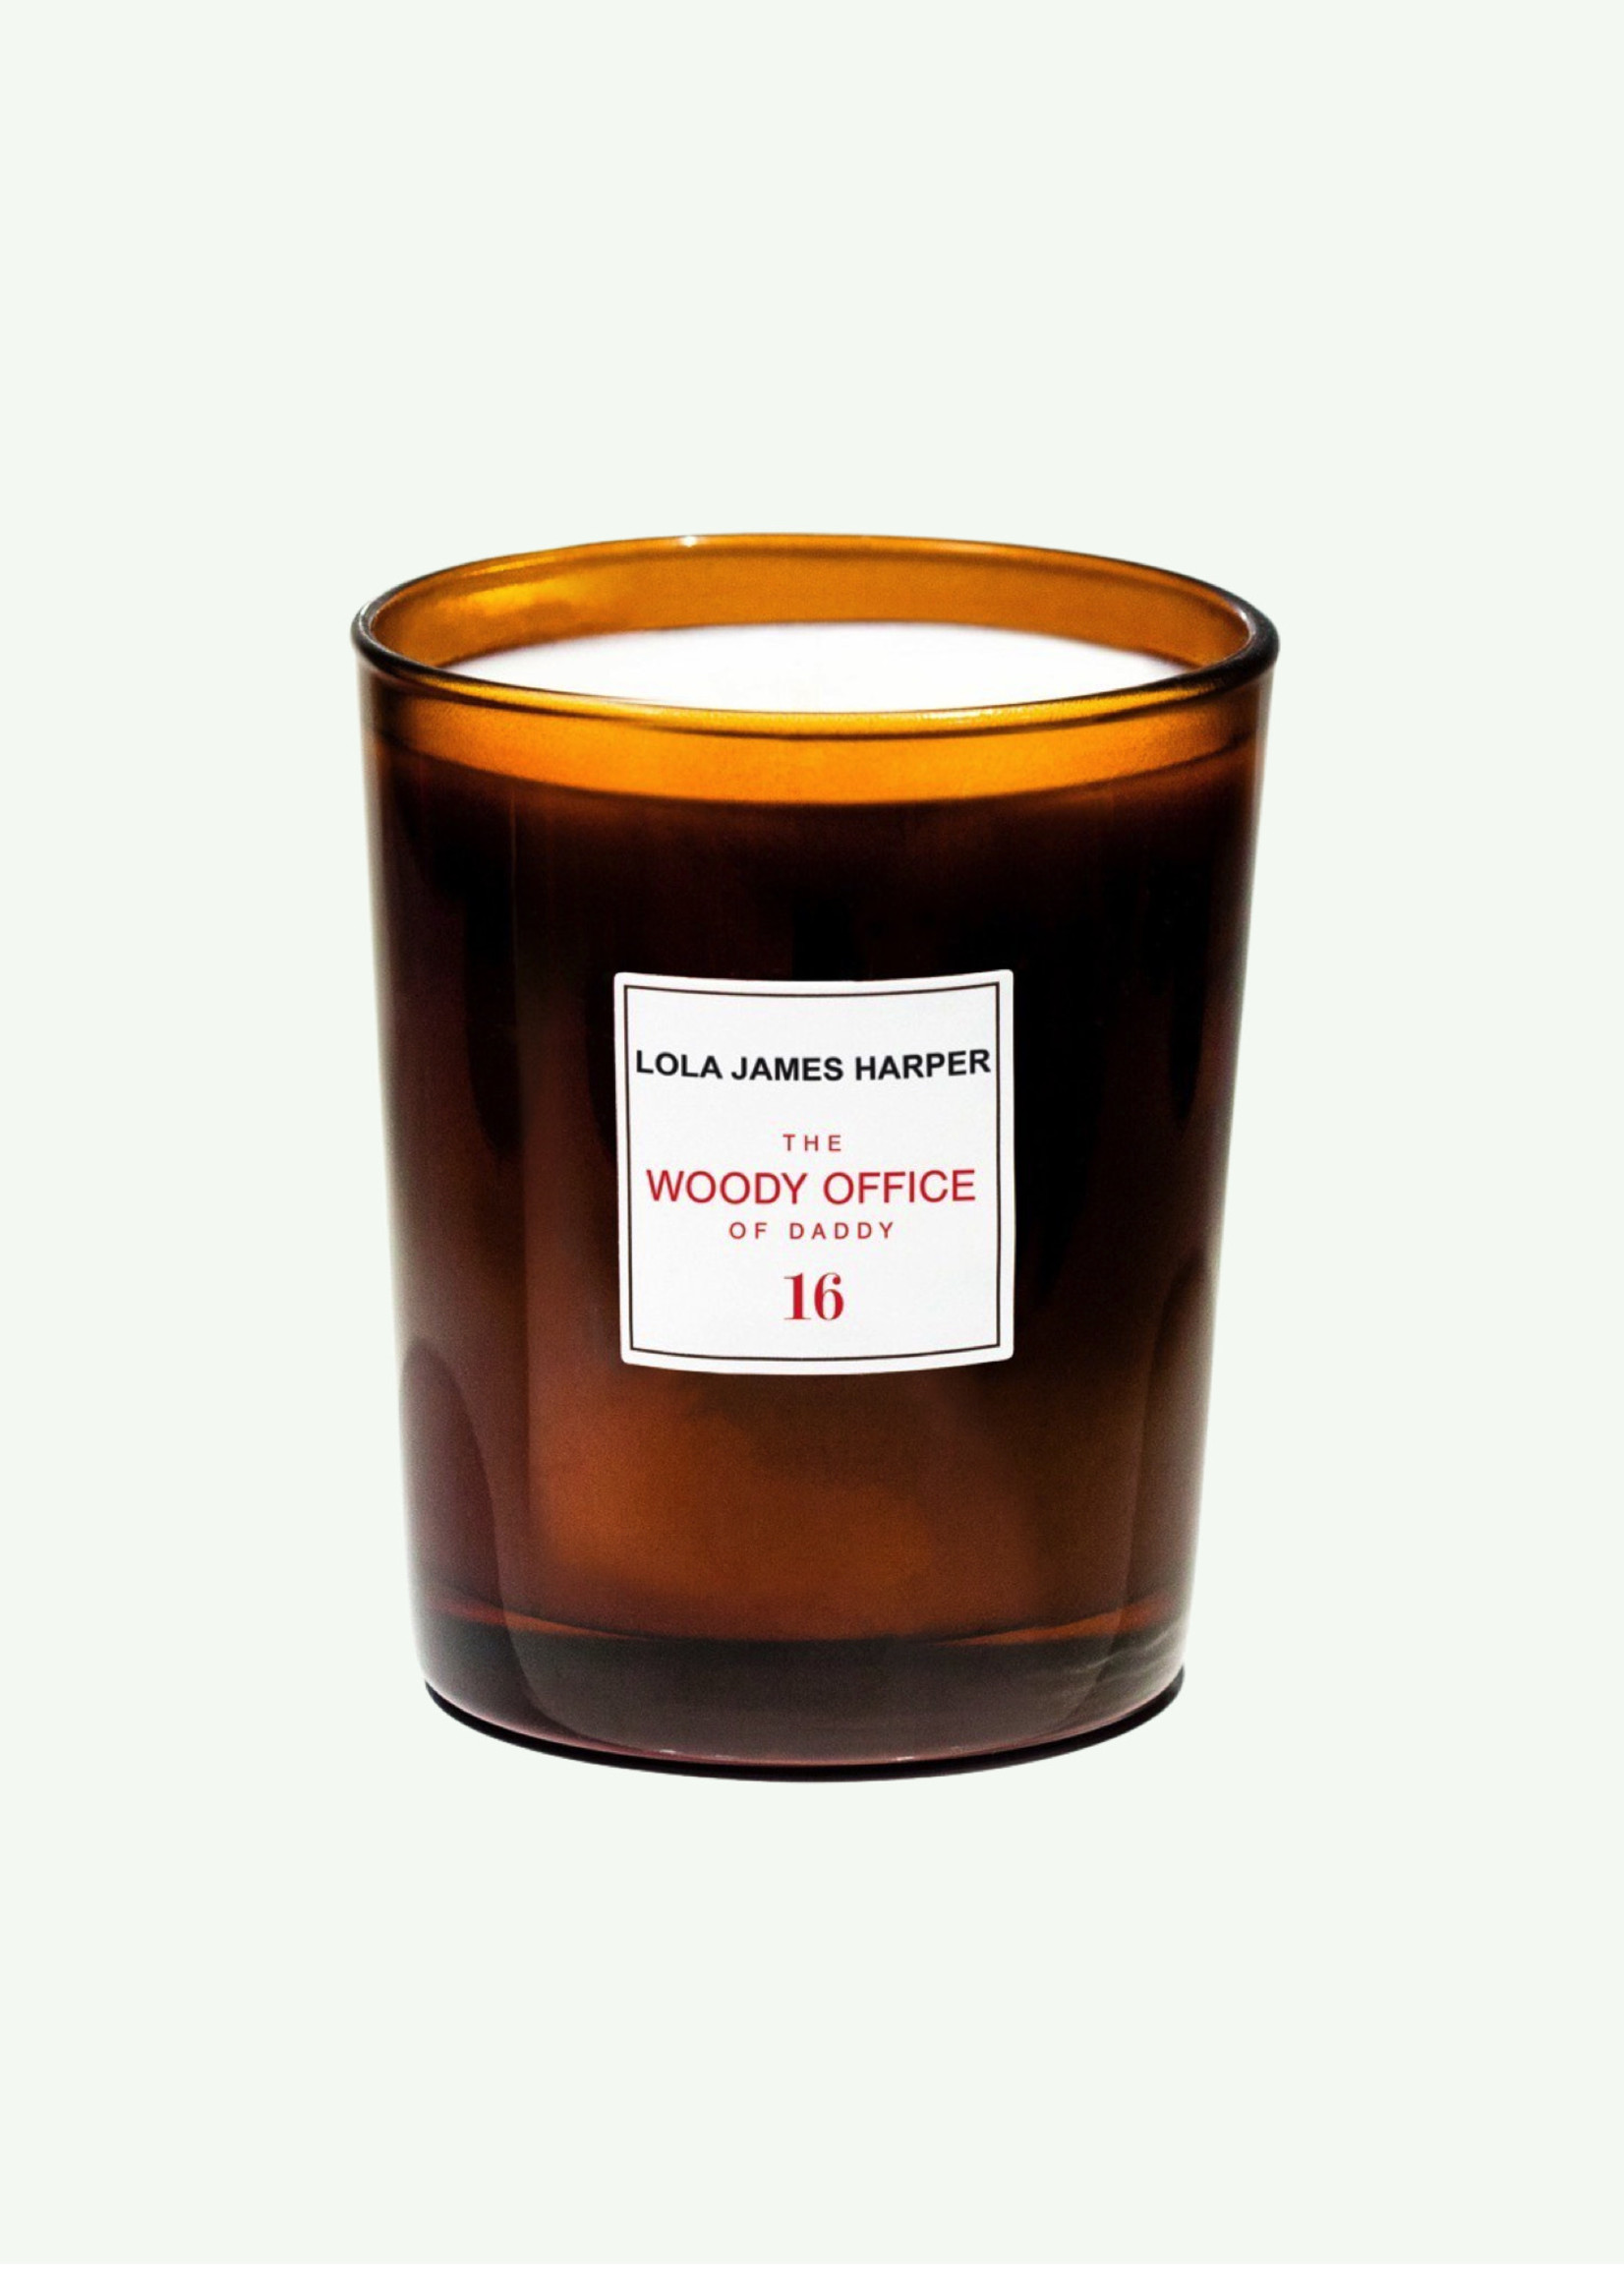 Lola James Harper The Woody Office of Daddy - Scented Candle 190 gr